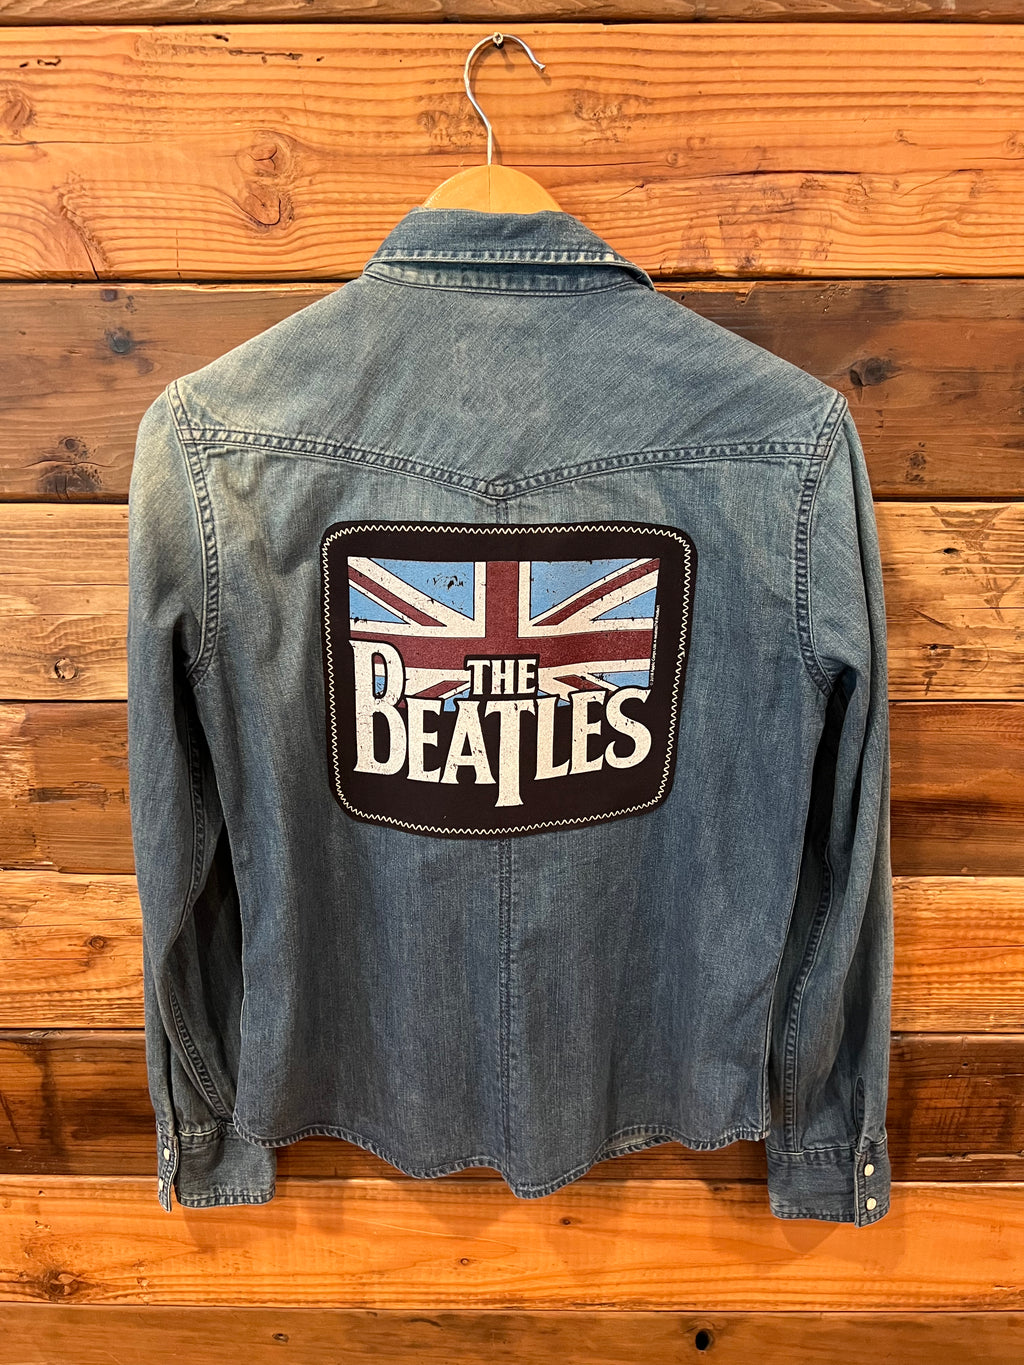 The Beatles Union Jack Flag One of a Kind American Eagle Outfitters vintage denim shirt, MadAndie custom western jean shirt